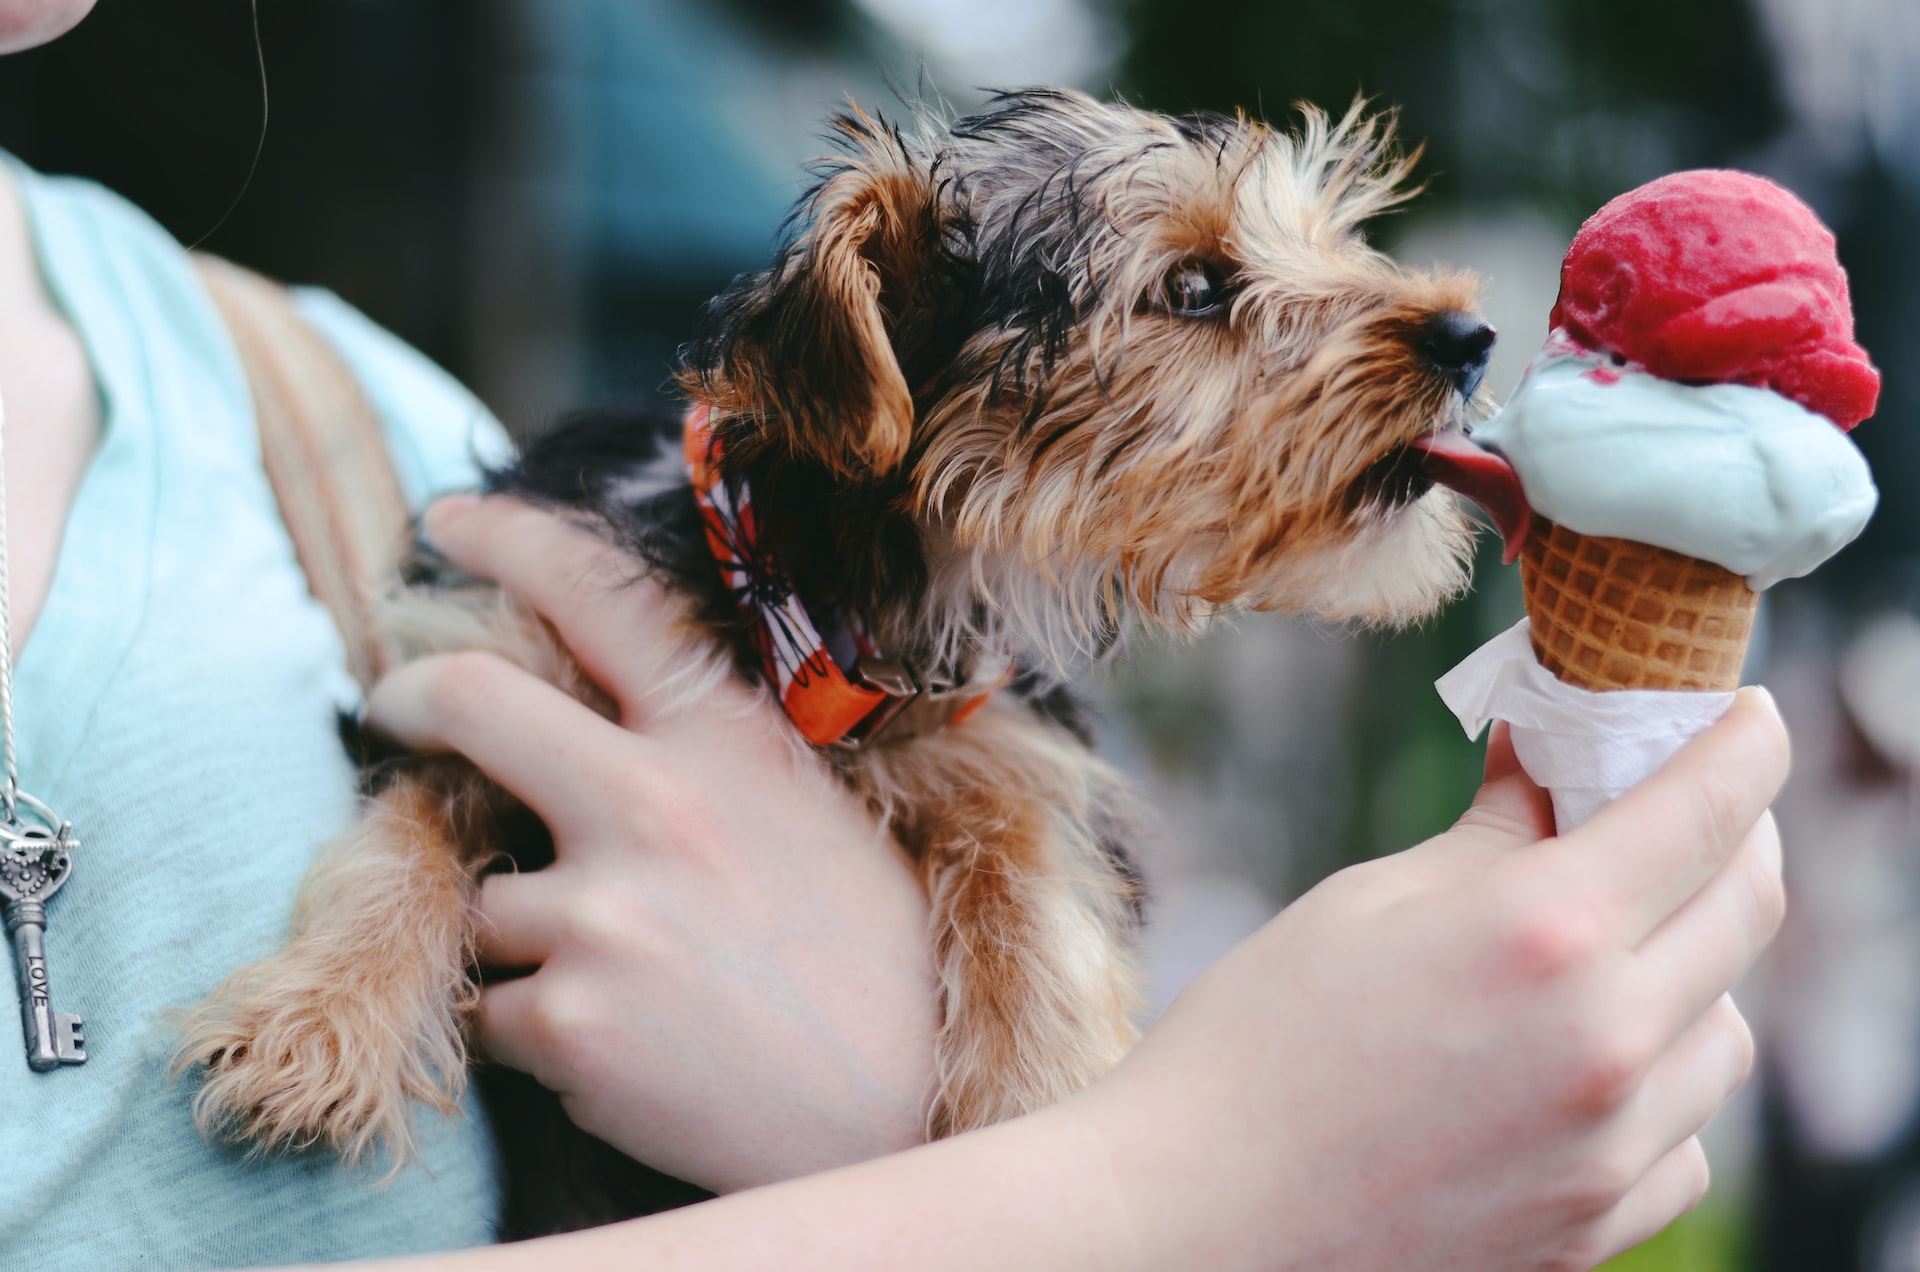 dog licking ice cream cone out of a person's hand